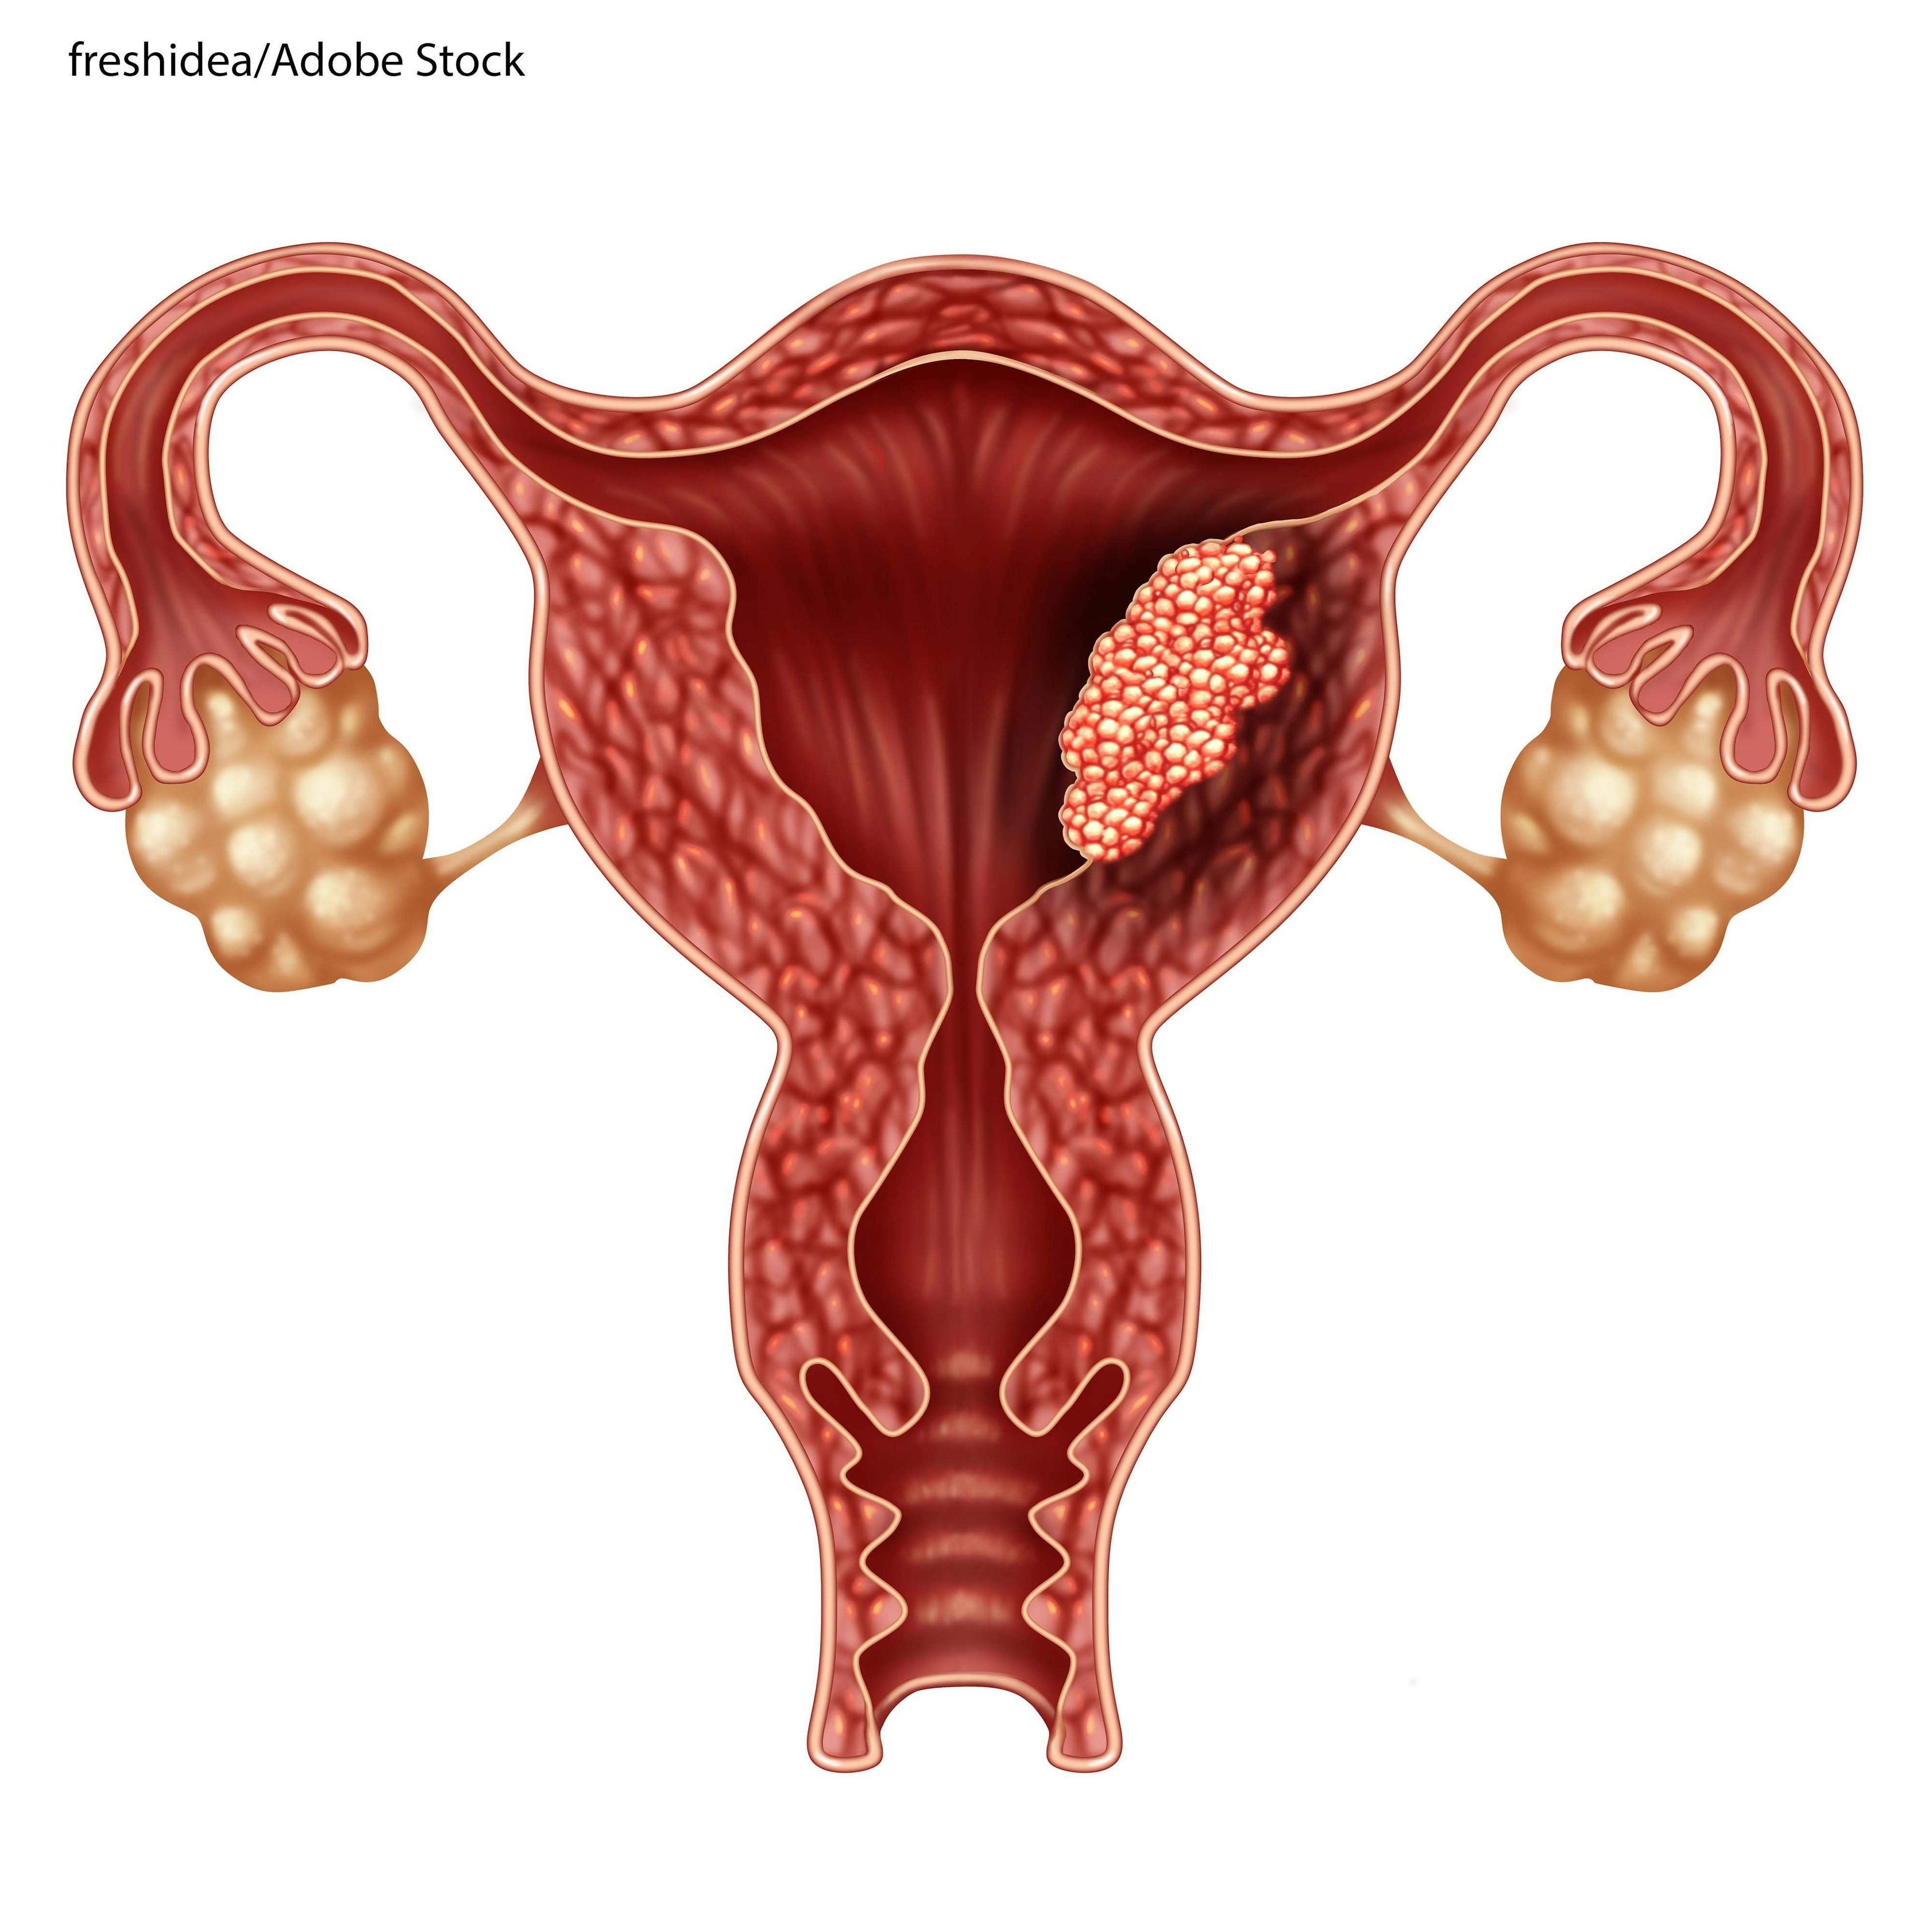 Early Chemo Does Not Improve Survival in Endometrial Cancer